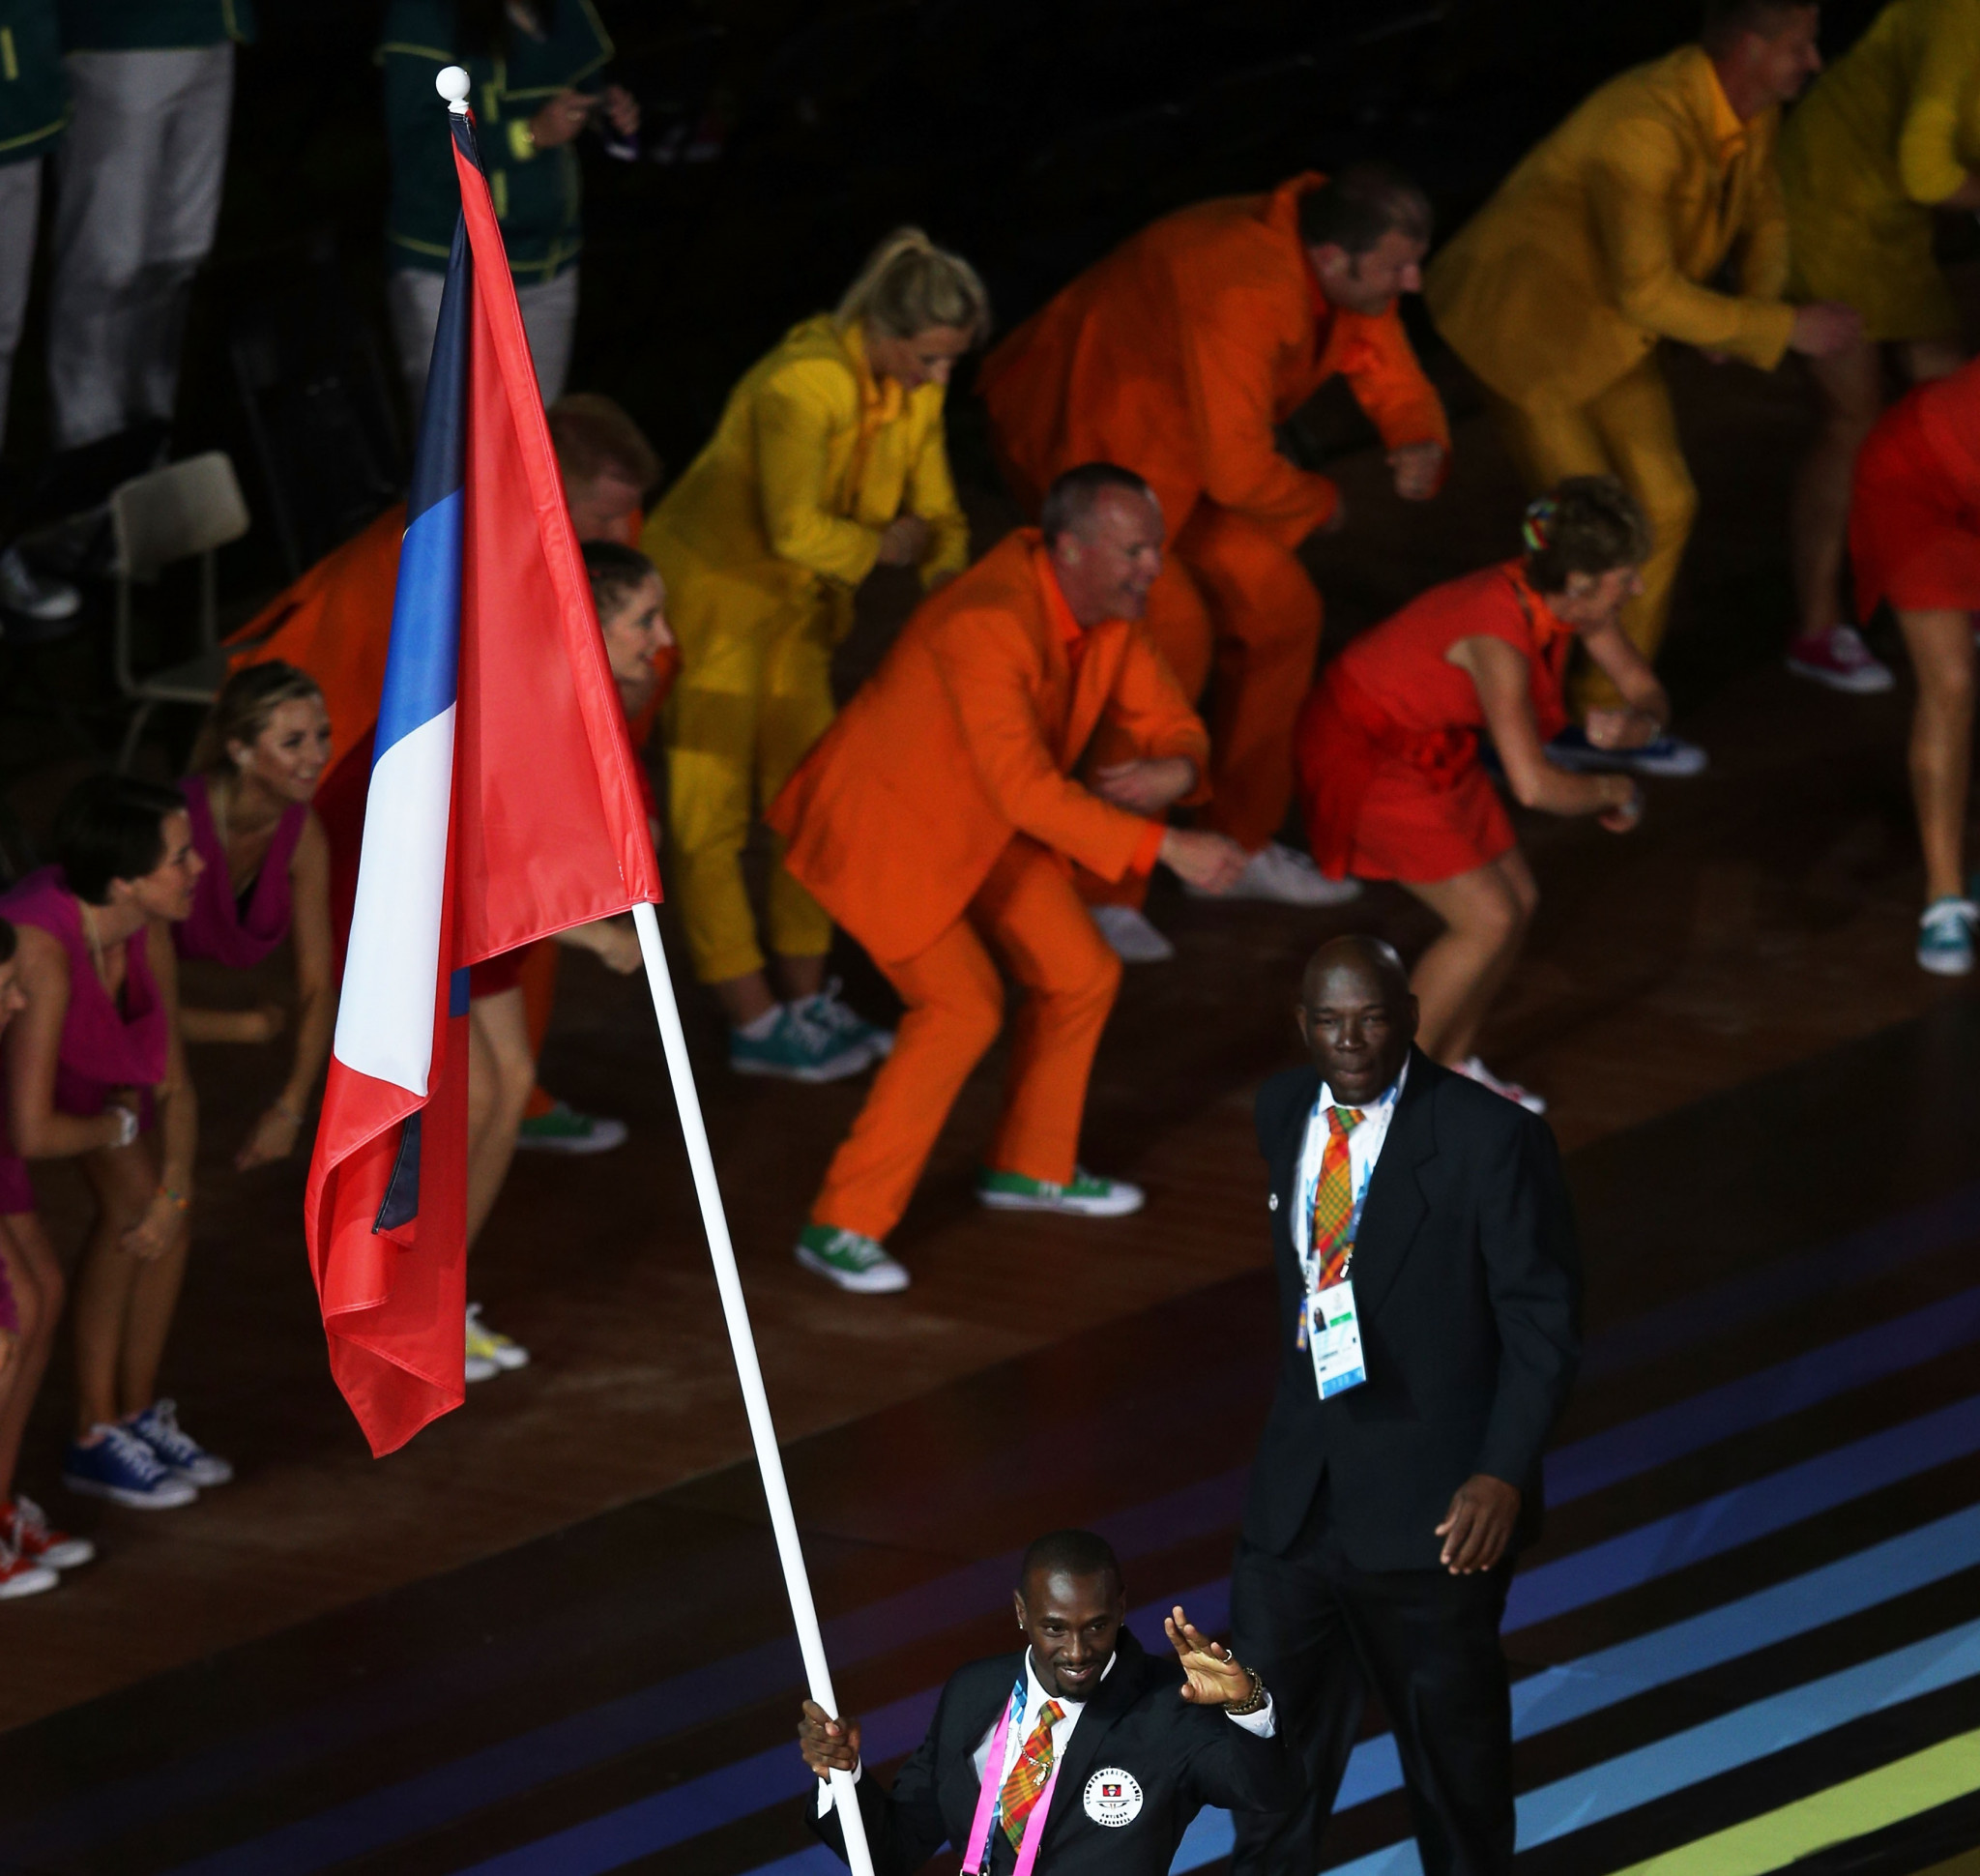 Antigua and Barbuda has competed in 10 editions of the Commonwealth Games ©Getty Images